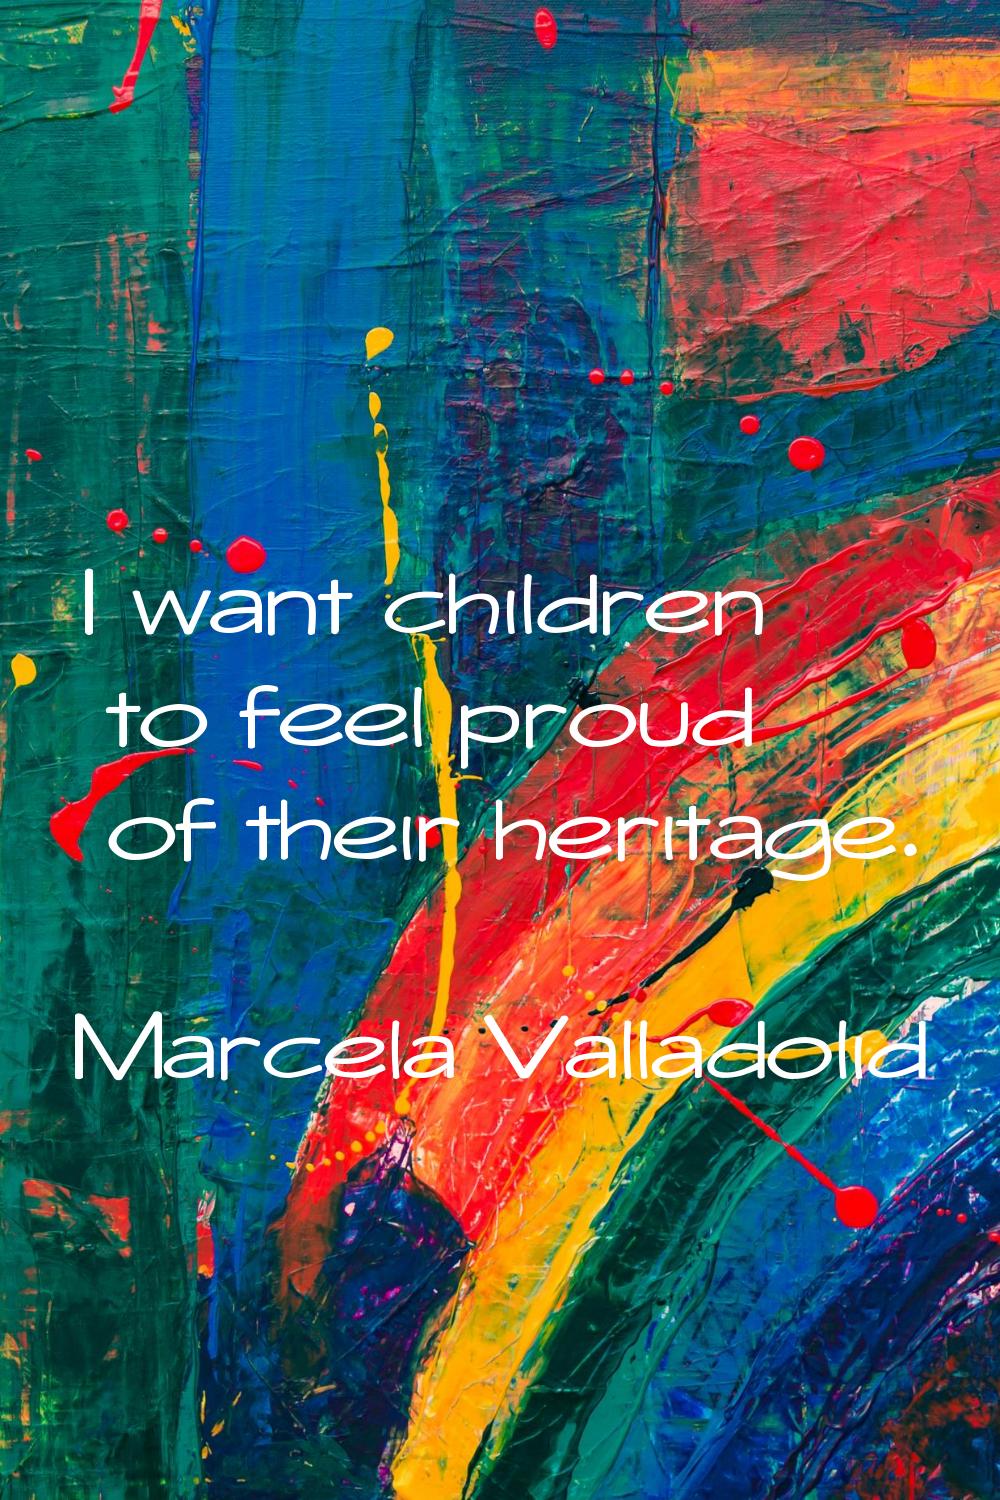 I want children to feel proud of their heritage.